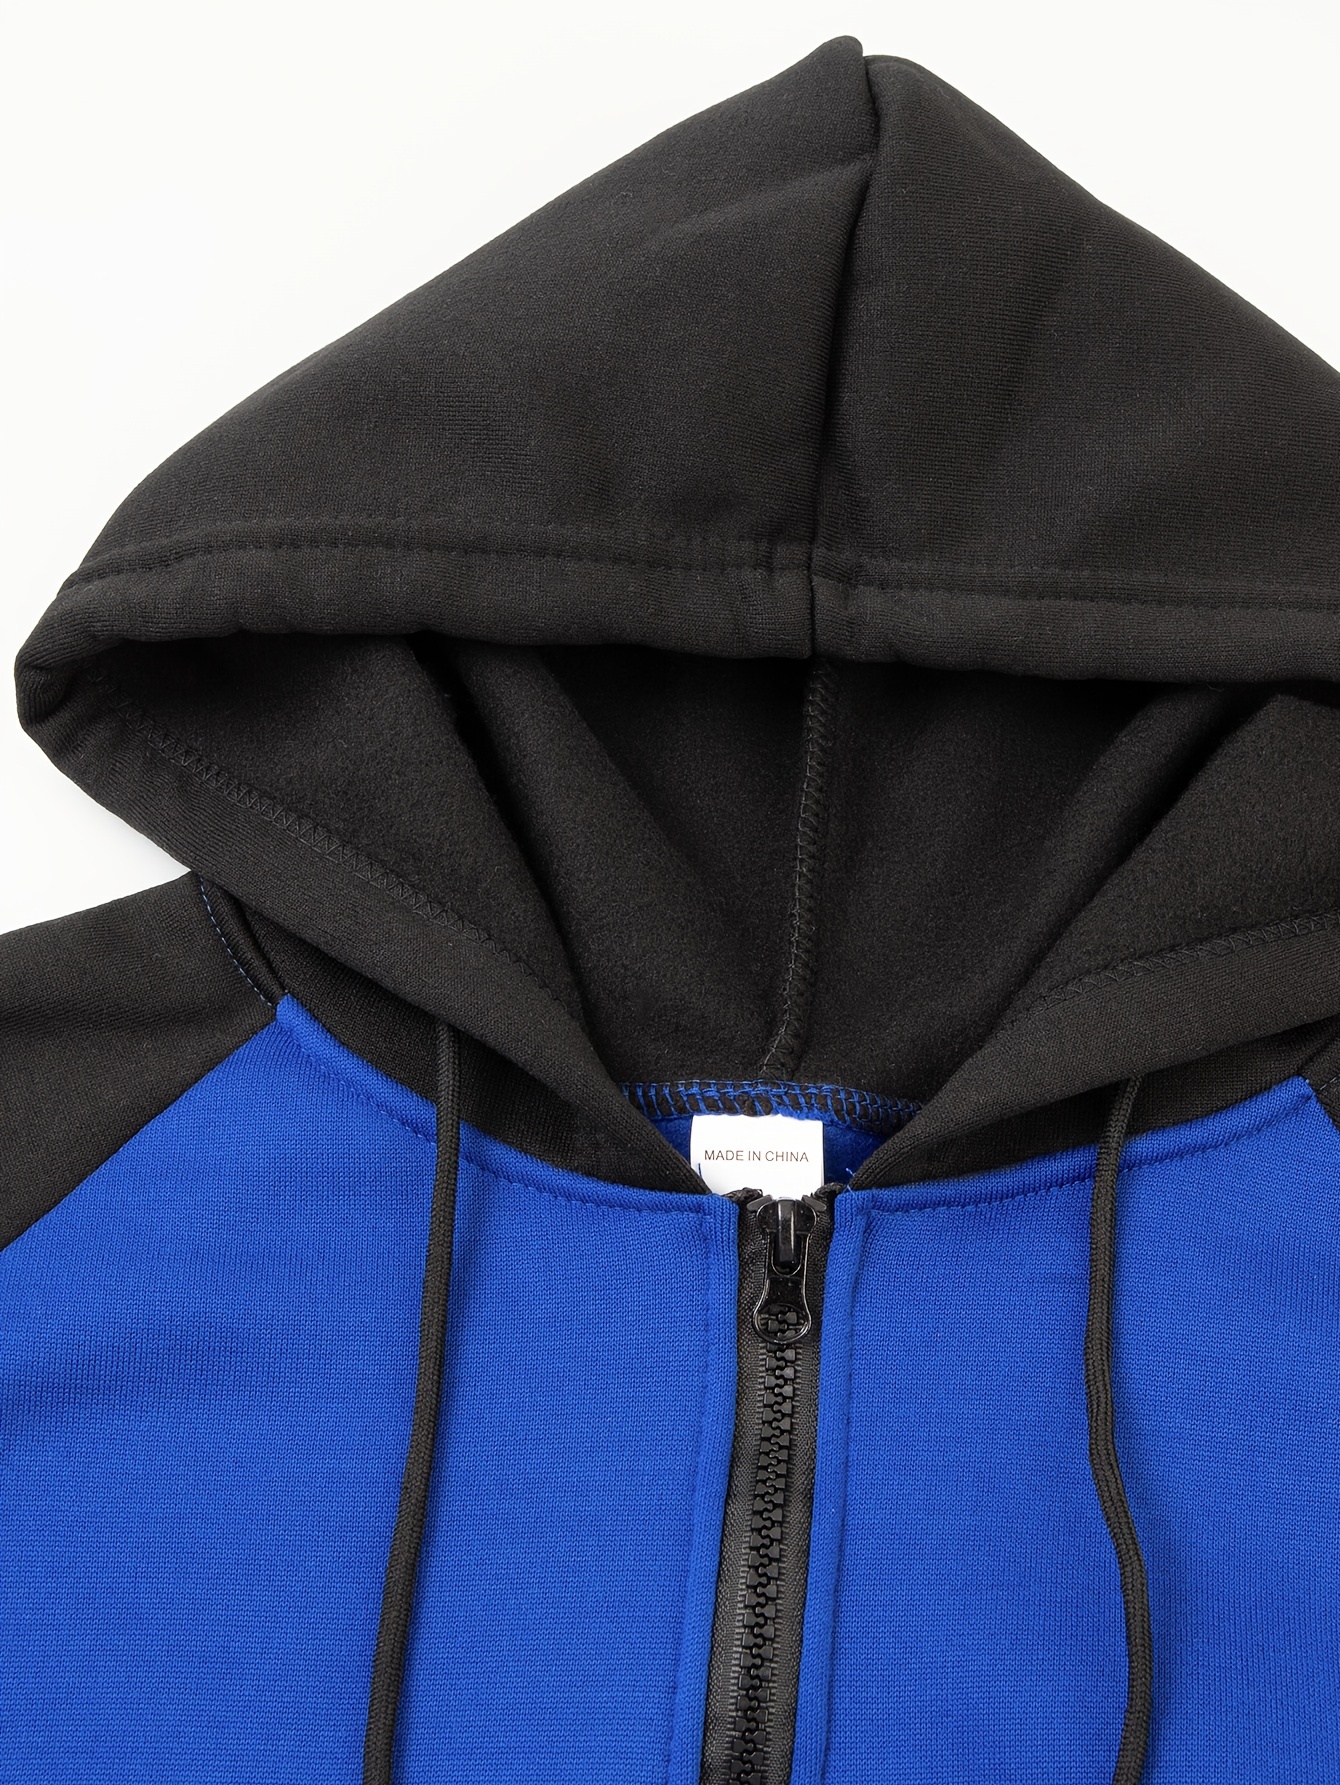 spring and autumn mens color block drawstring hooded long sleeve zip up jacket with pockets workout training details 17